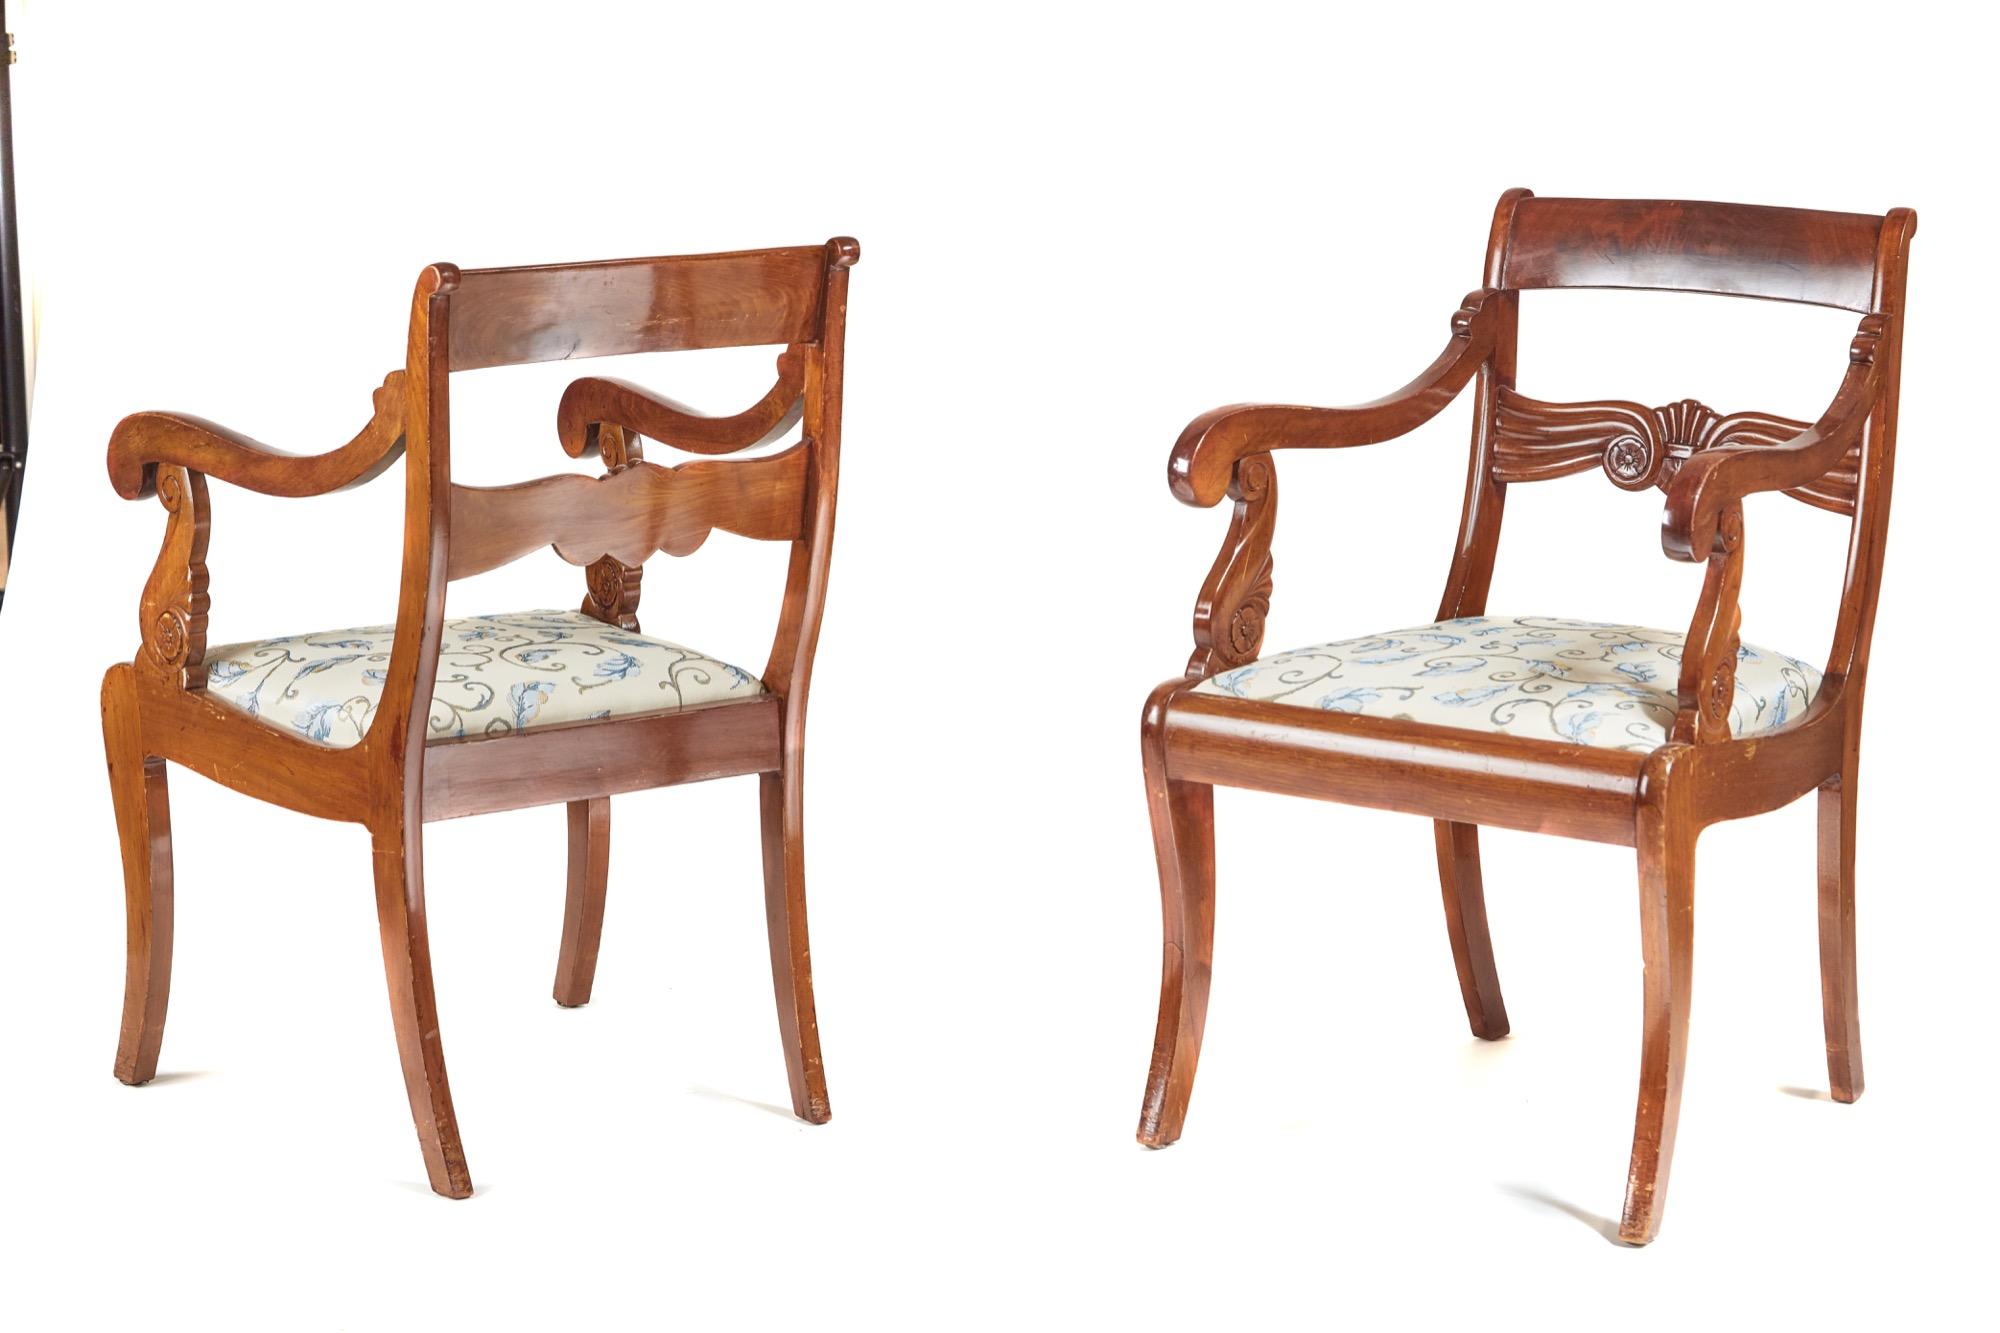 These are a pair of antique French 19th century antique mahogany carver chairs. The top rail boasts an attractive flame mahogany veneer center carved rail. They have pretty shaped scrolled arms, the drop seats are newly upholstered and the stand on